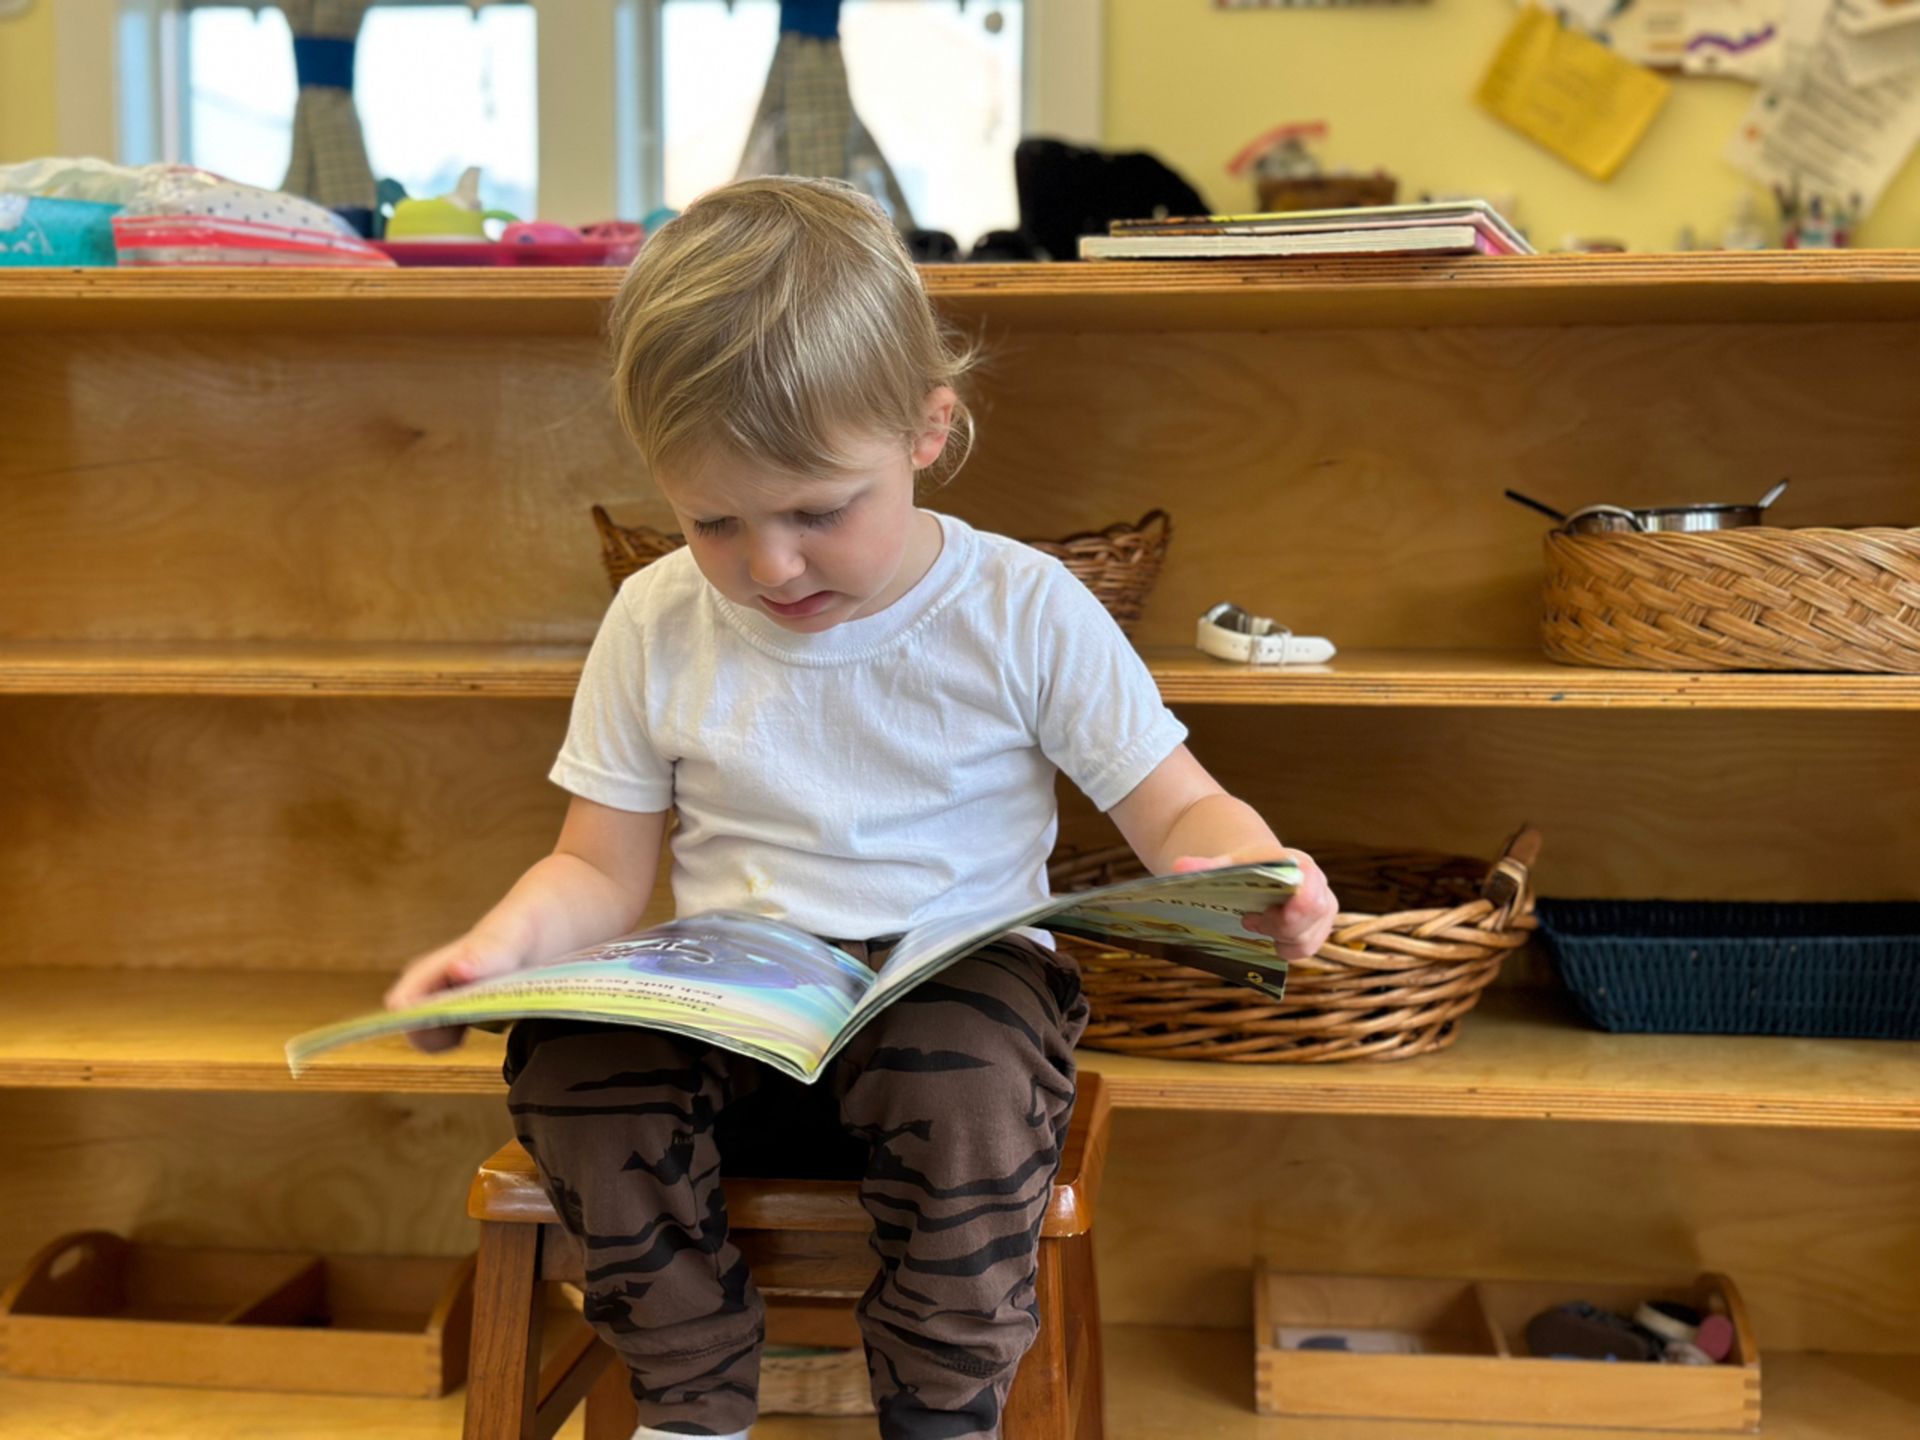 A Montessori  young boy sits on a stool reading a book